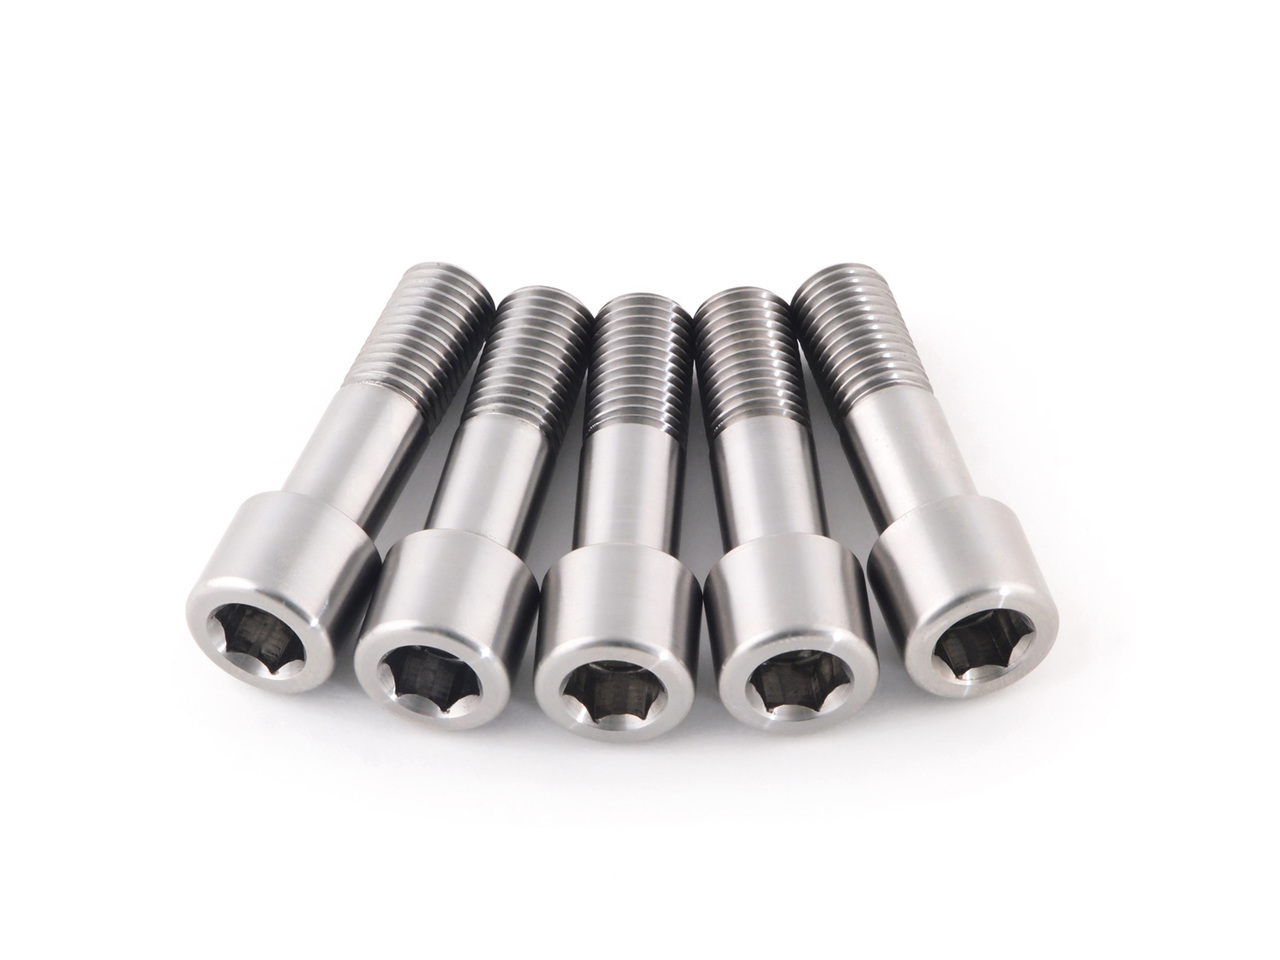 Buy Titanium Cush Drive Pins 5 Pack  Fits BST Wheels with a 35mm  Pin Length SKU: 166188 at the price of US$ 149.95 | BrocksPerformance.com